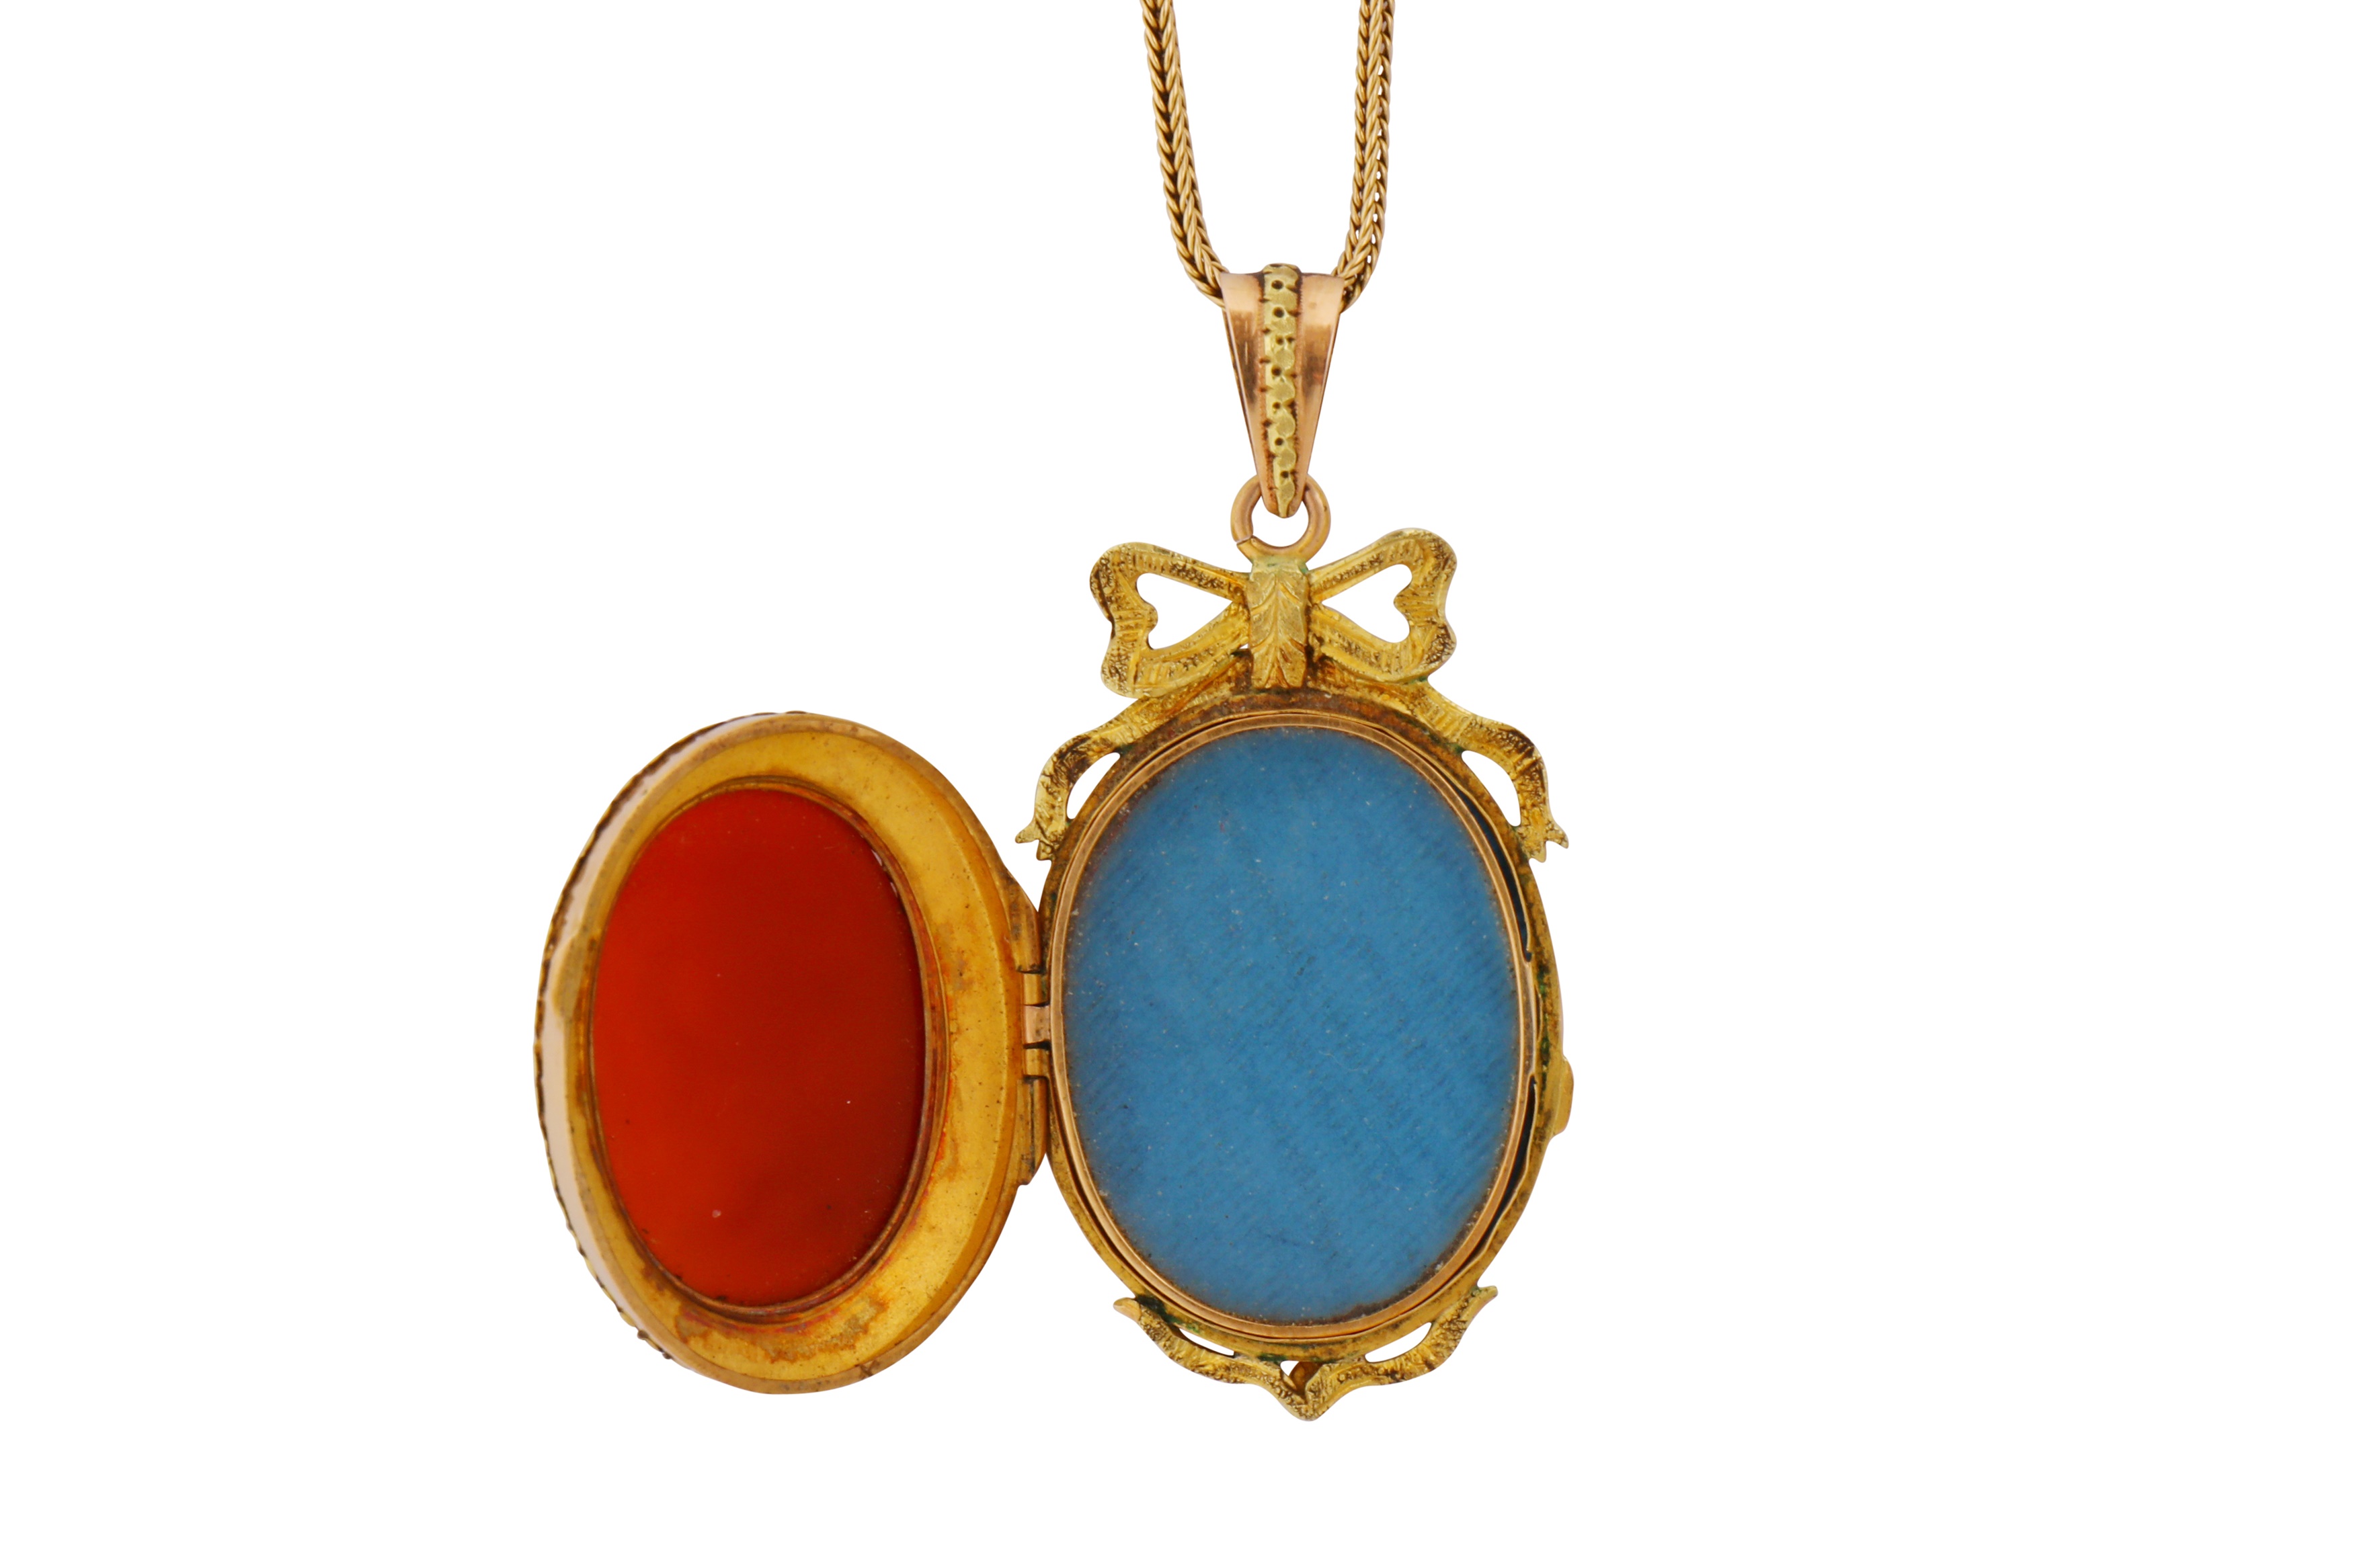 A CAMEO LOCKET AND CHAIN - Image 3 of 4